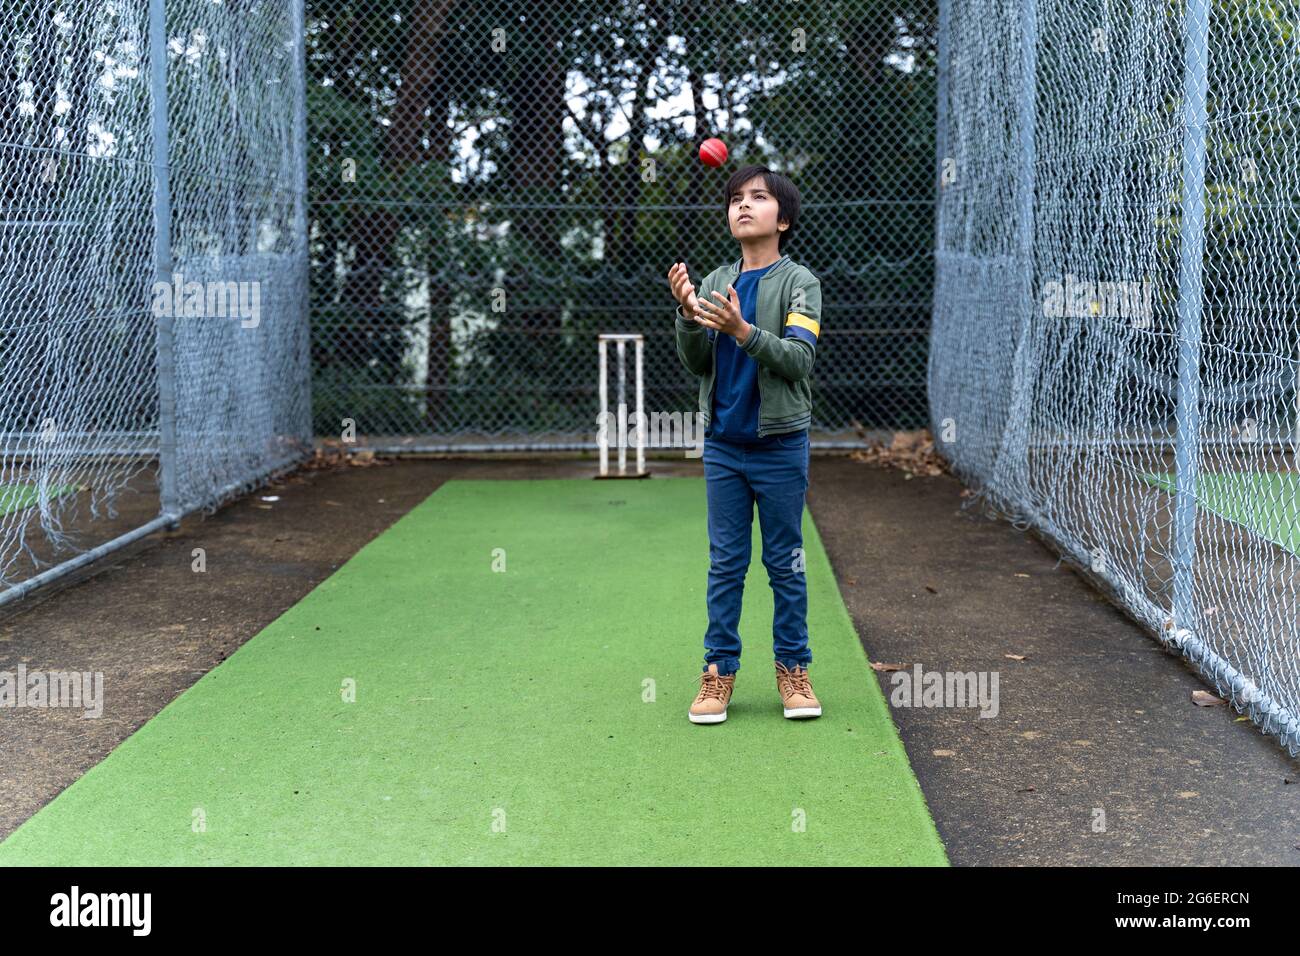 Young boy playing with cricket ball at cricket pitch under nets. Stock Photo